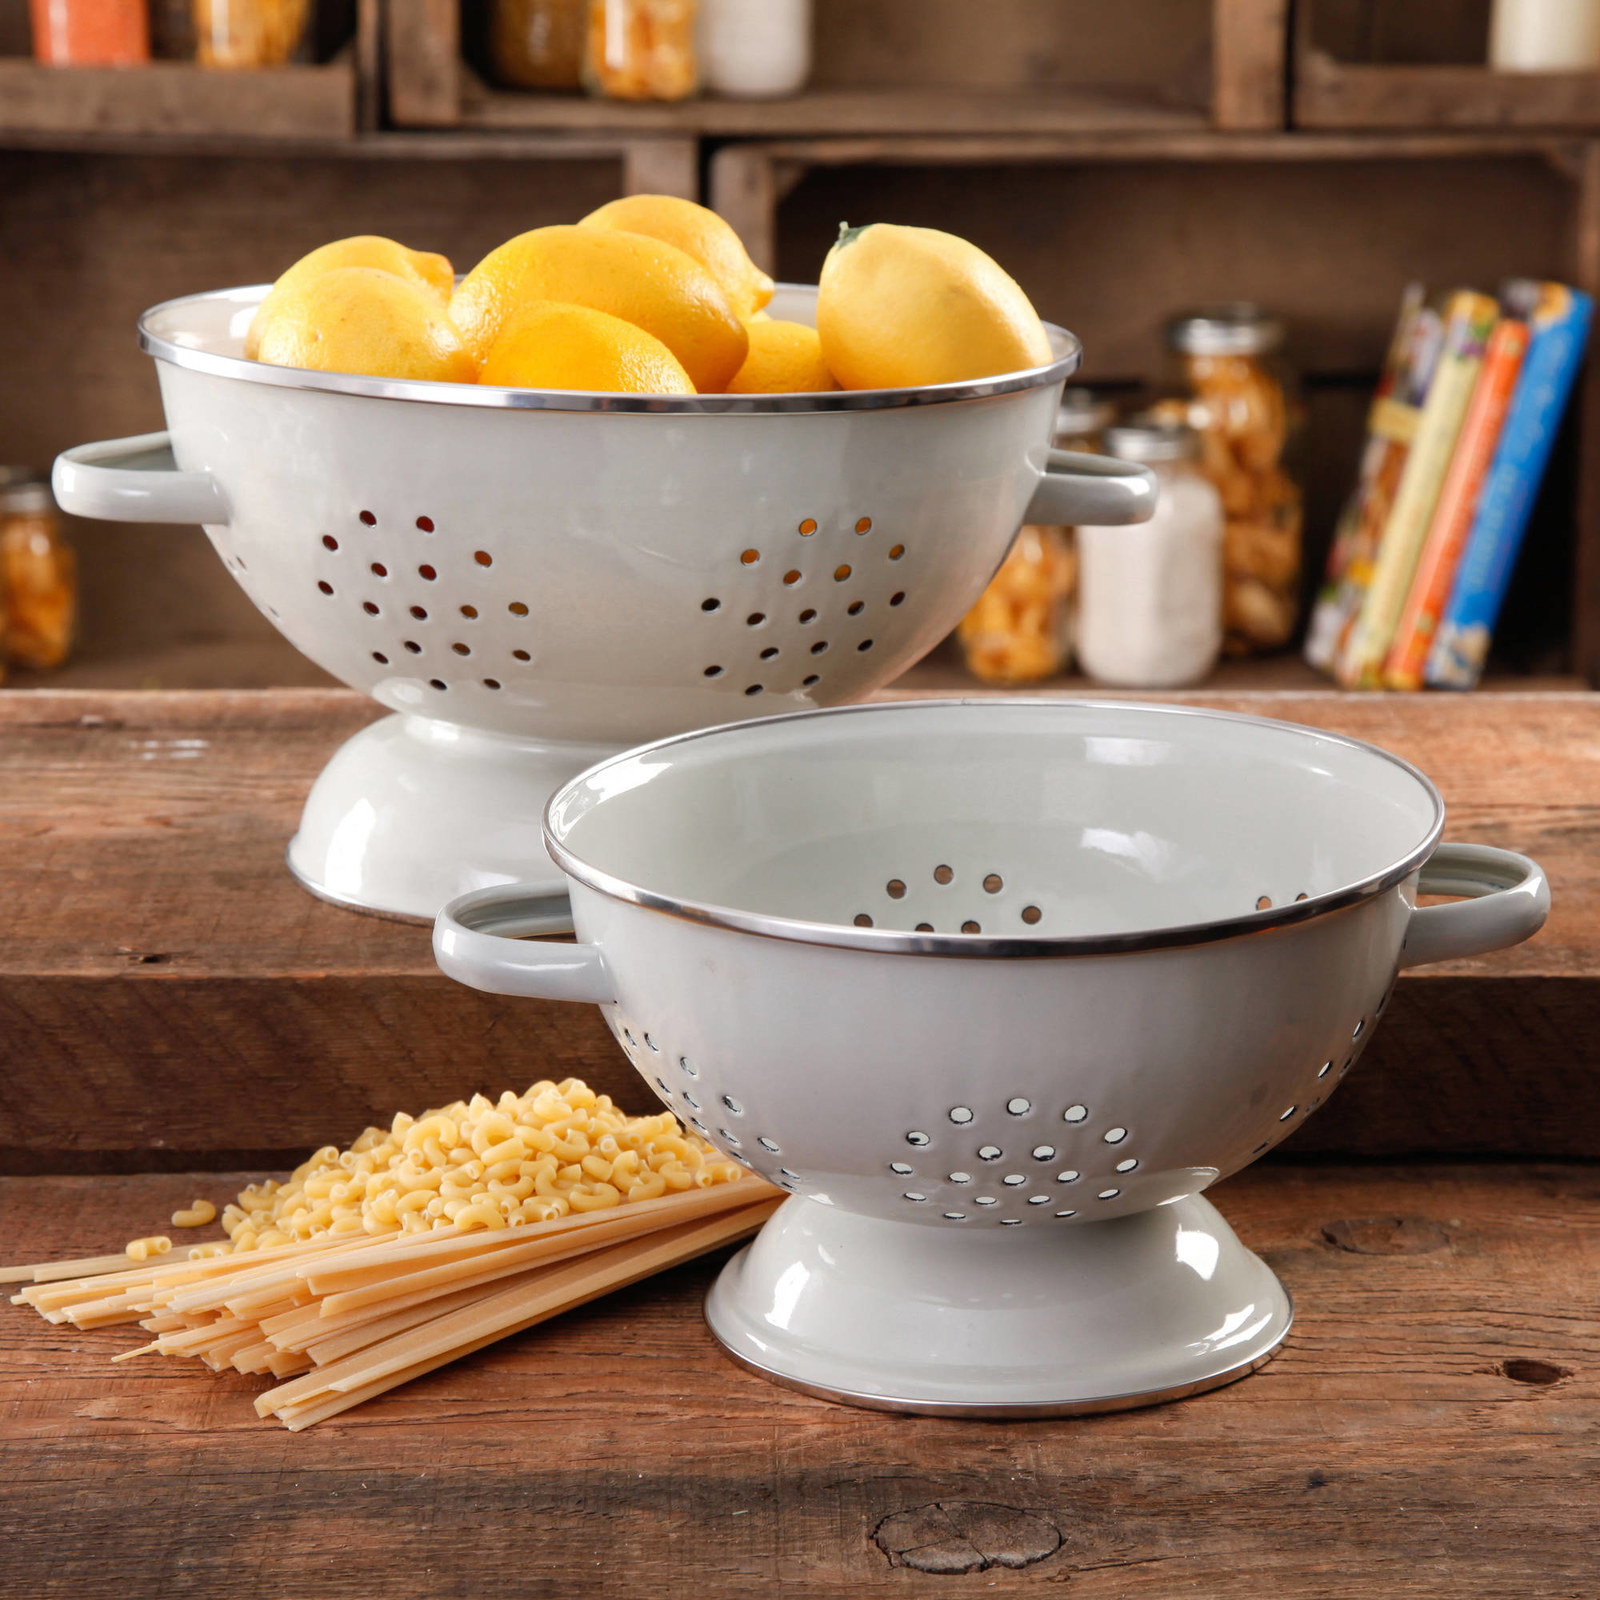 The Pioneer Woman Flea Market Ceramic Colander with Drip Plate for Washing and Serving Fruits and Veggies 